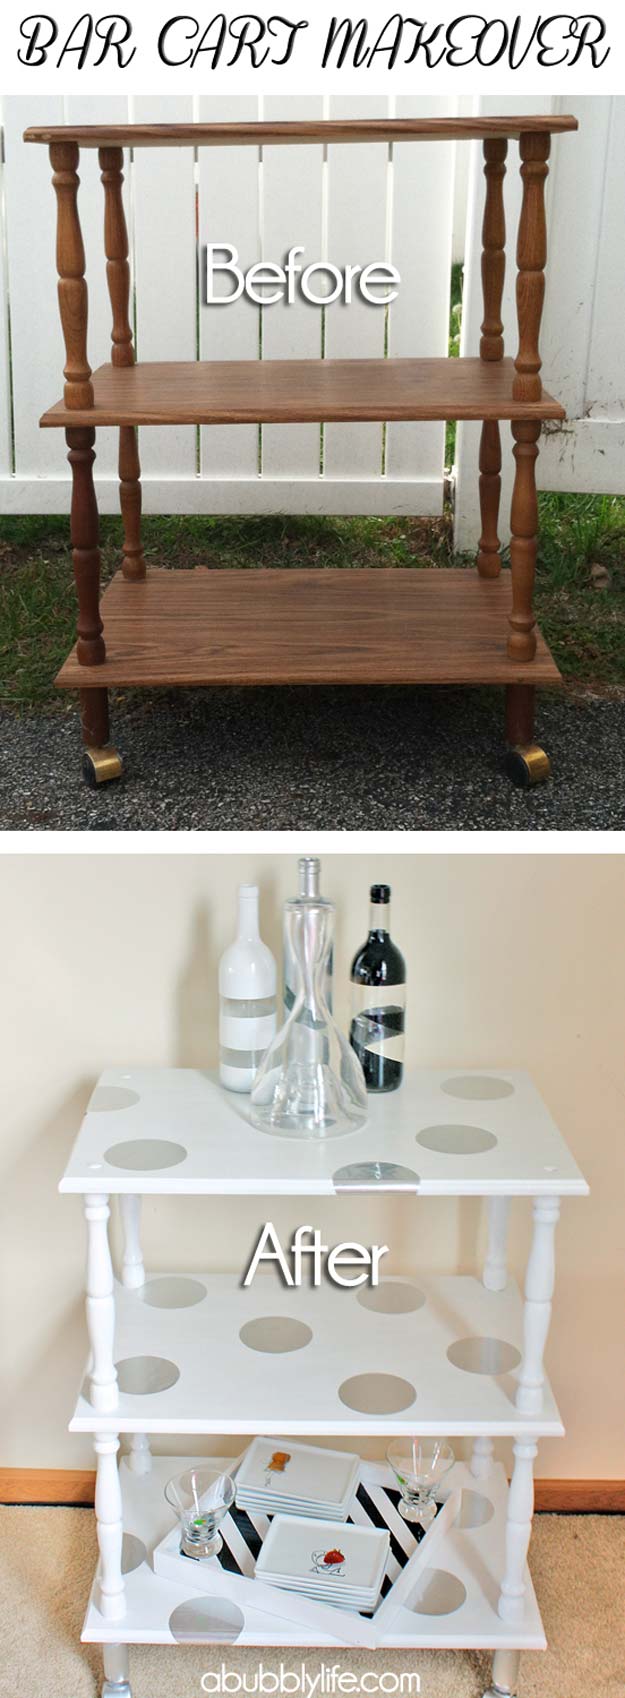 DIY Polka Dot Crafts and Projects - DIY Polka Dotted Bar Cart - Cool Clothes, Room and Home Decor, Wall Art, Mason Jars and Party Ideas, Canvas, Fabric and Paint Project Tutorials - Fun Craft Ideas for Teens, Kids and Adults Make Awesome DIY Gifts